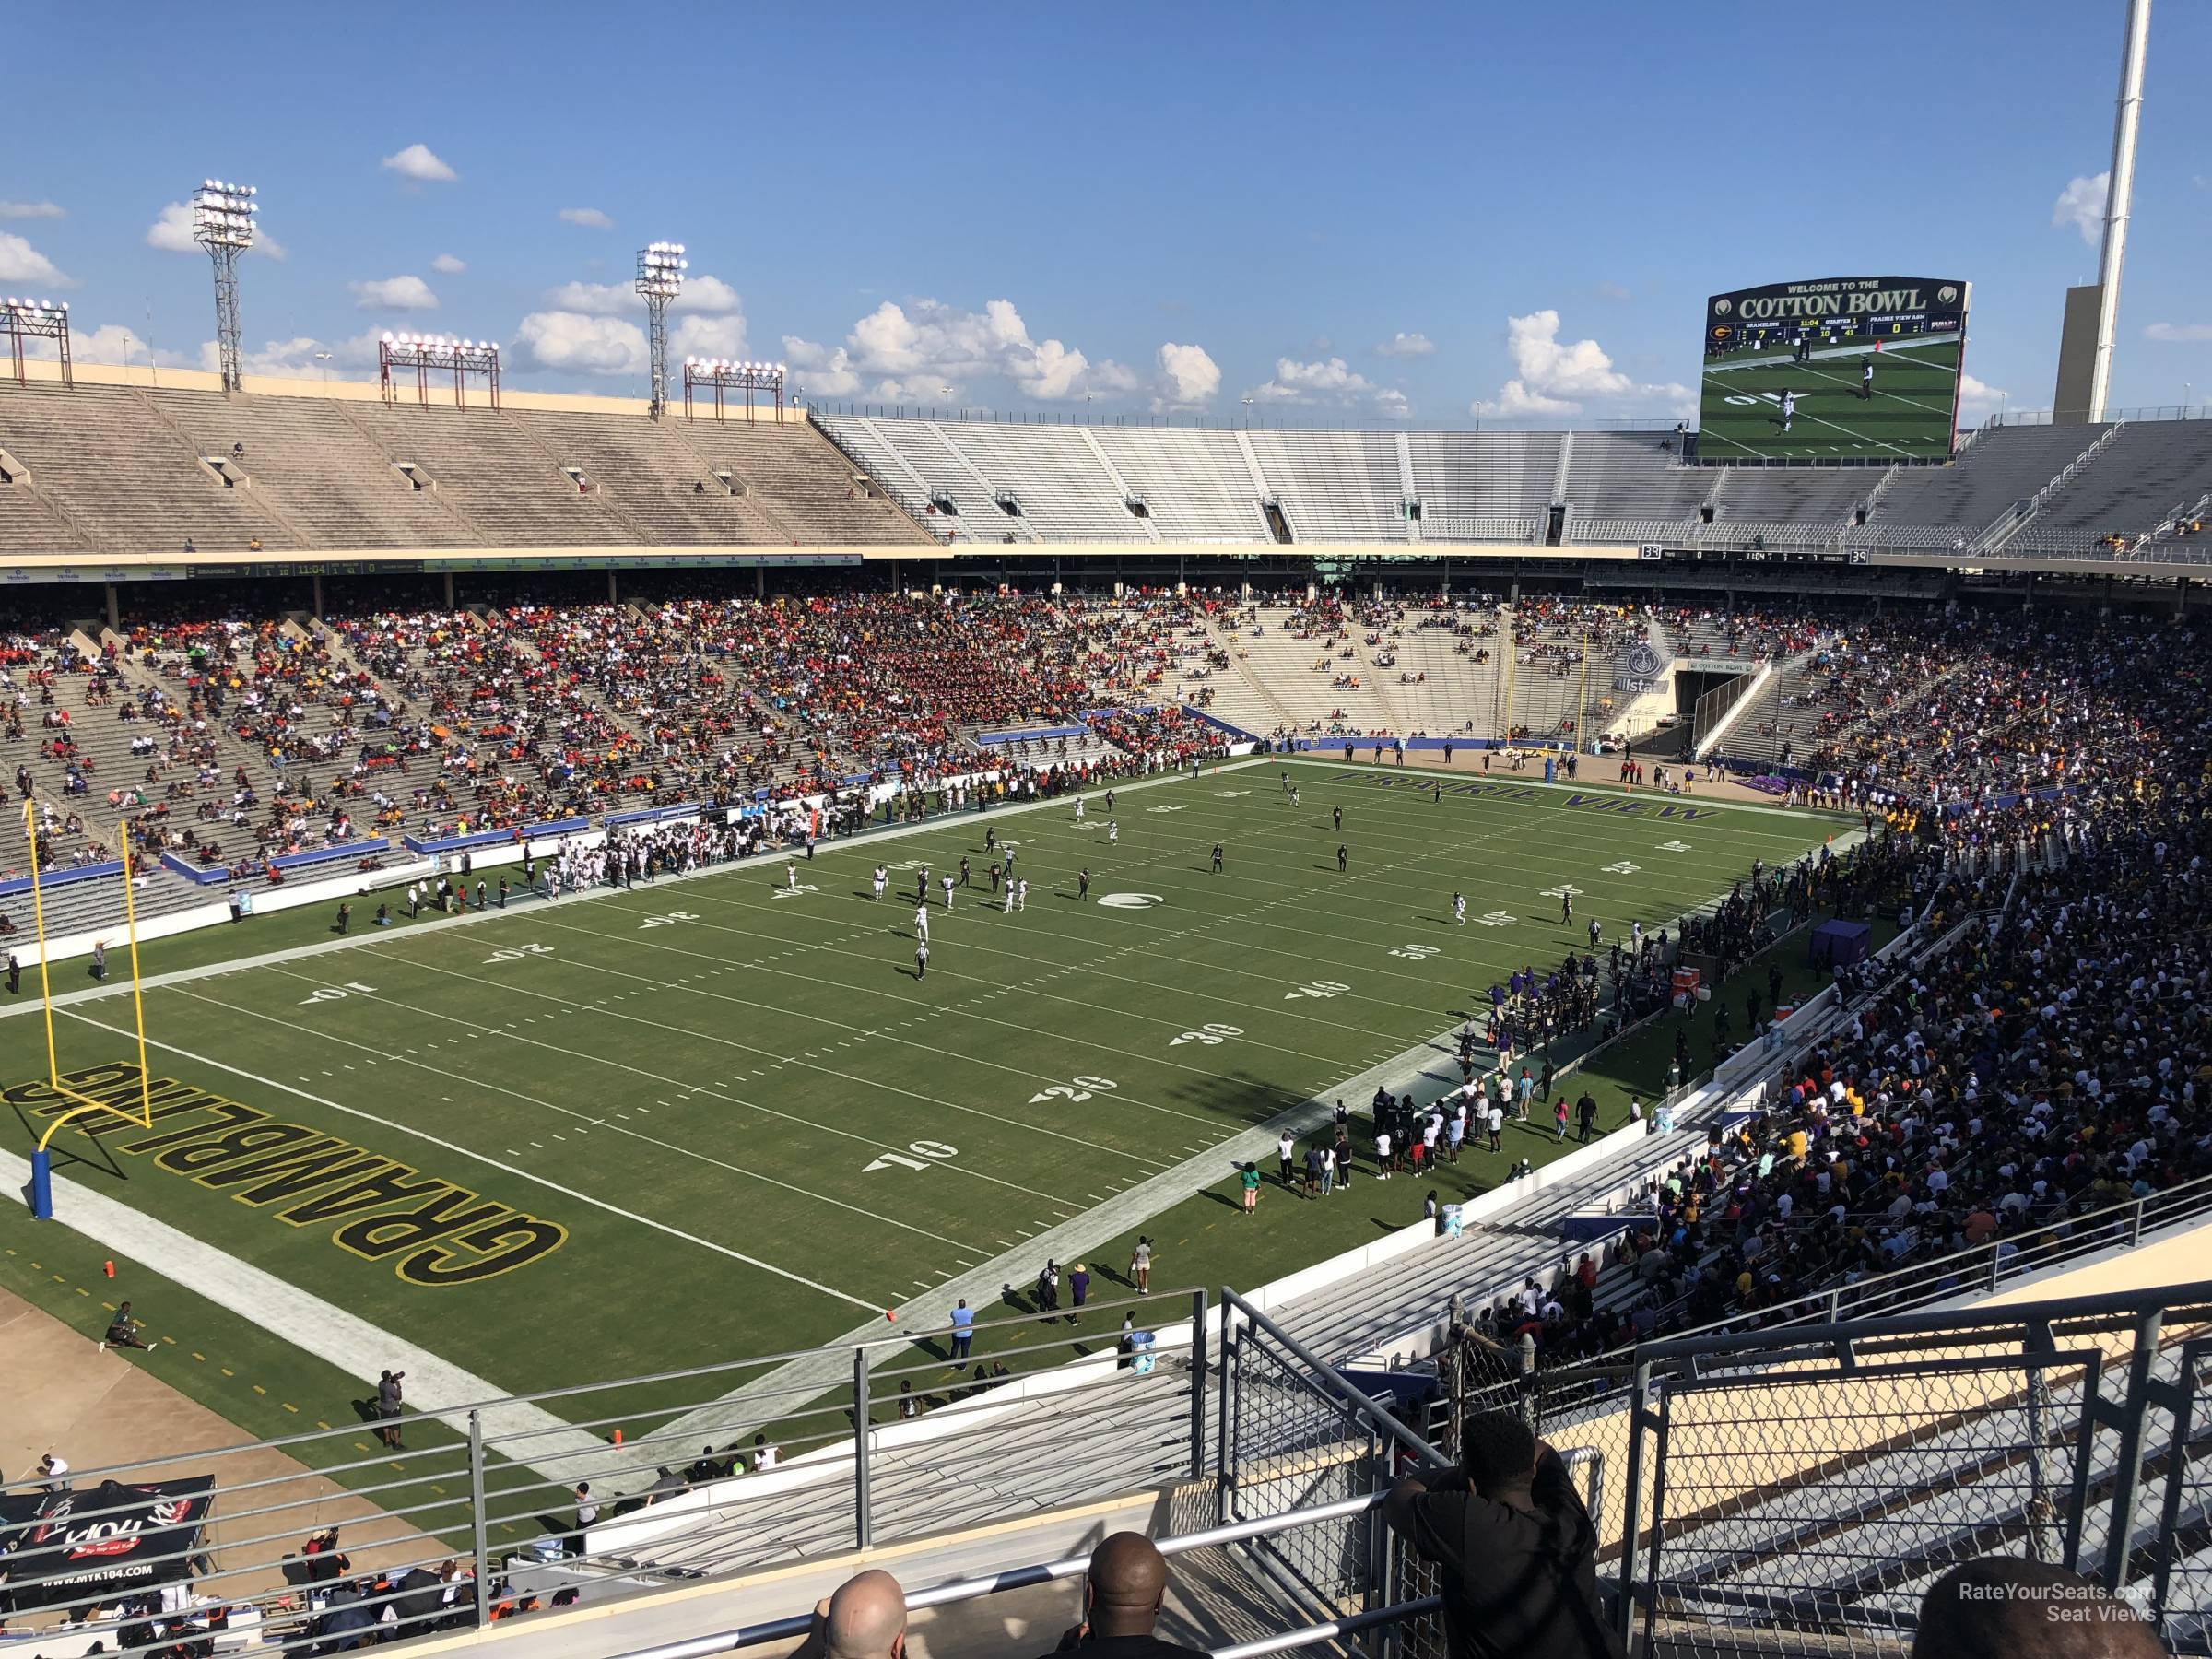 section 112, row 8 seat view  - cotton bowl